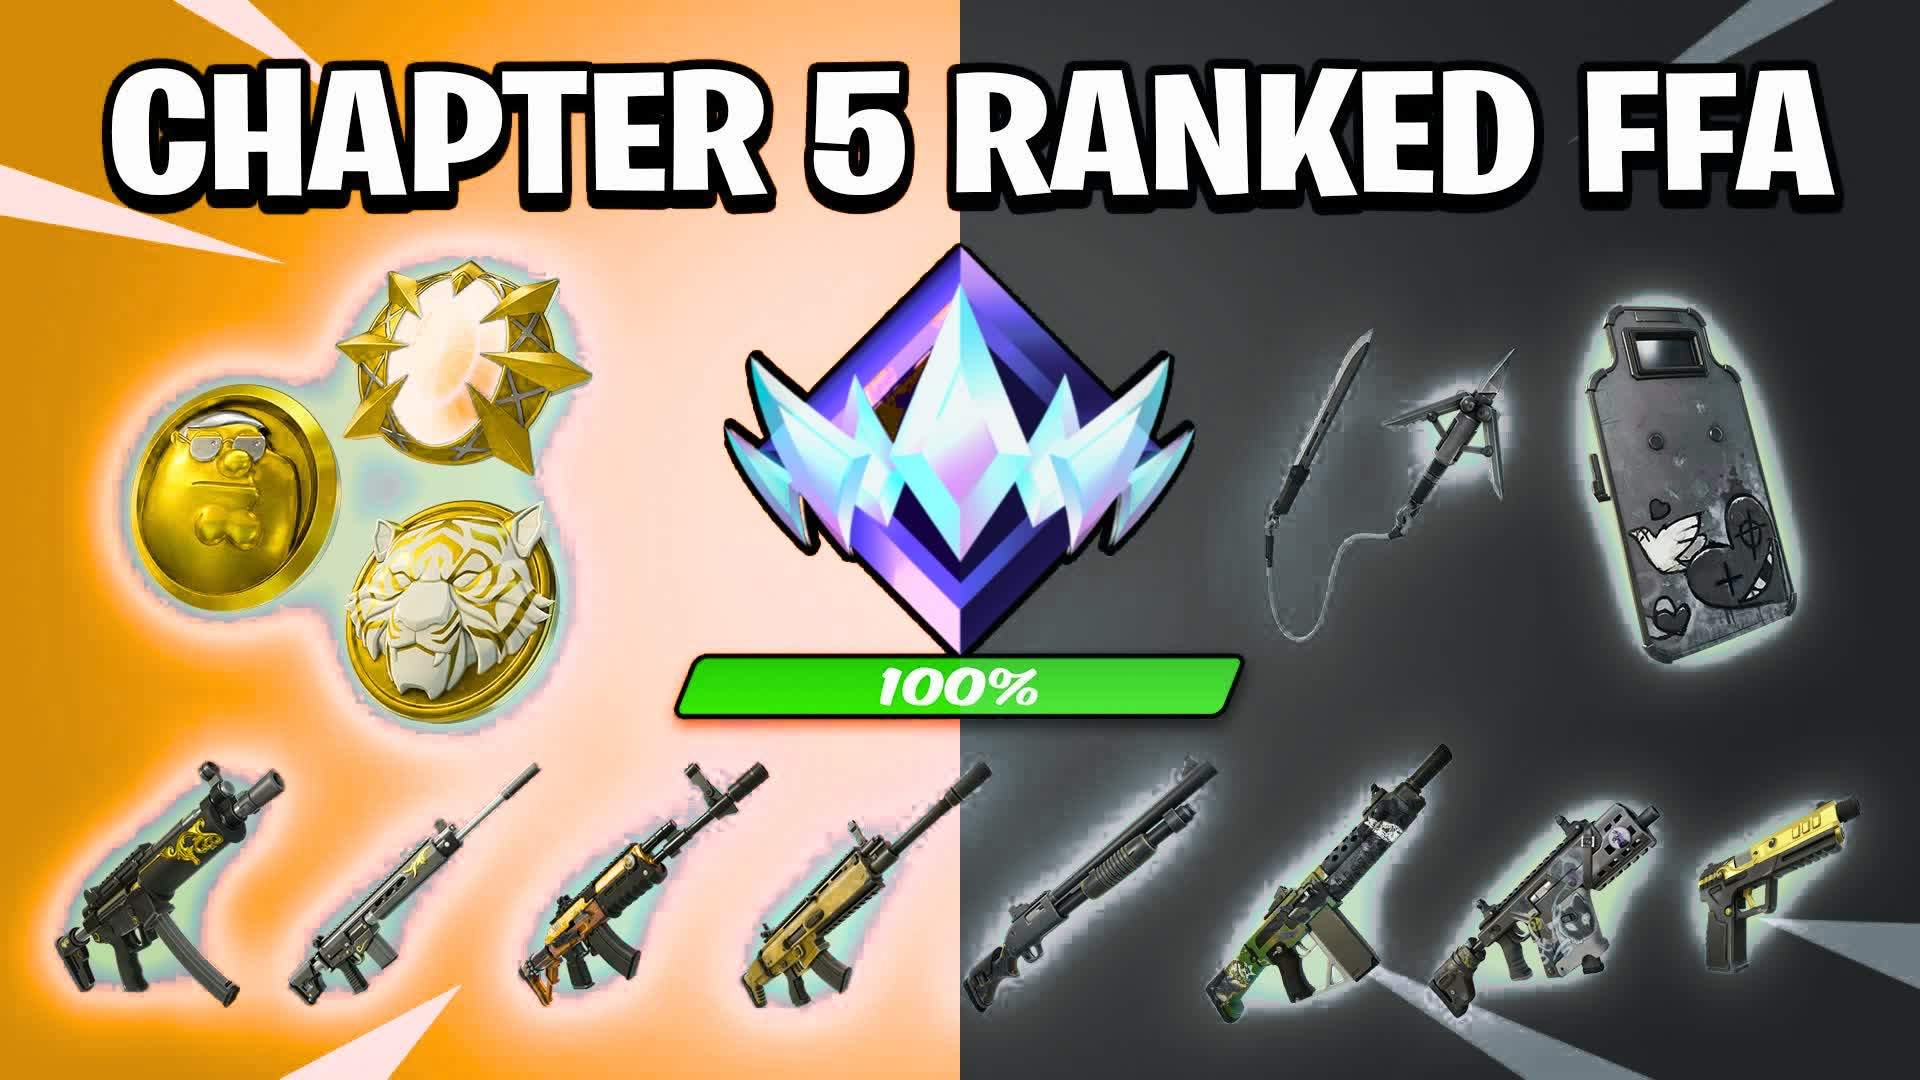 🏆CHAPTER 5 RANKED FFA🏆